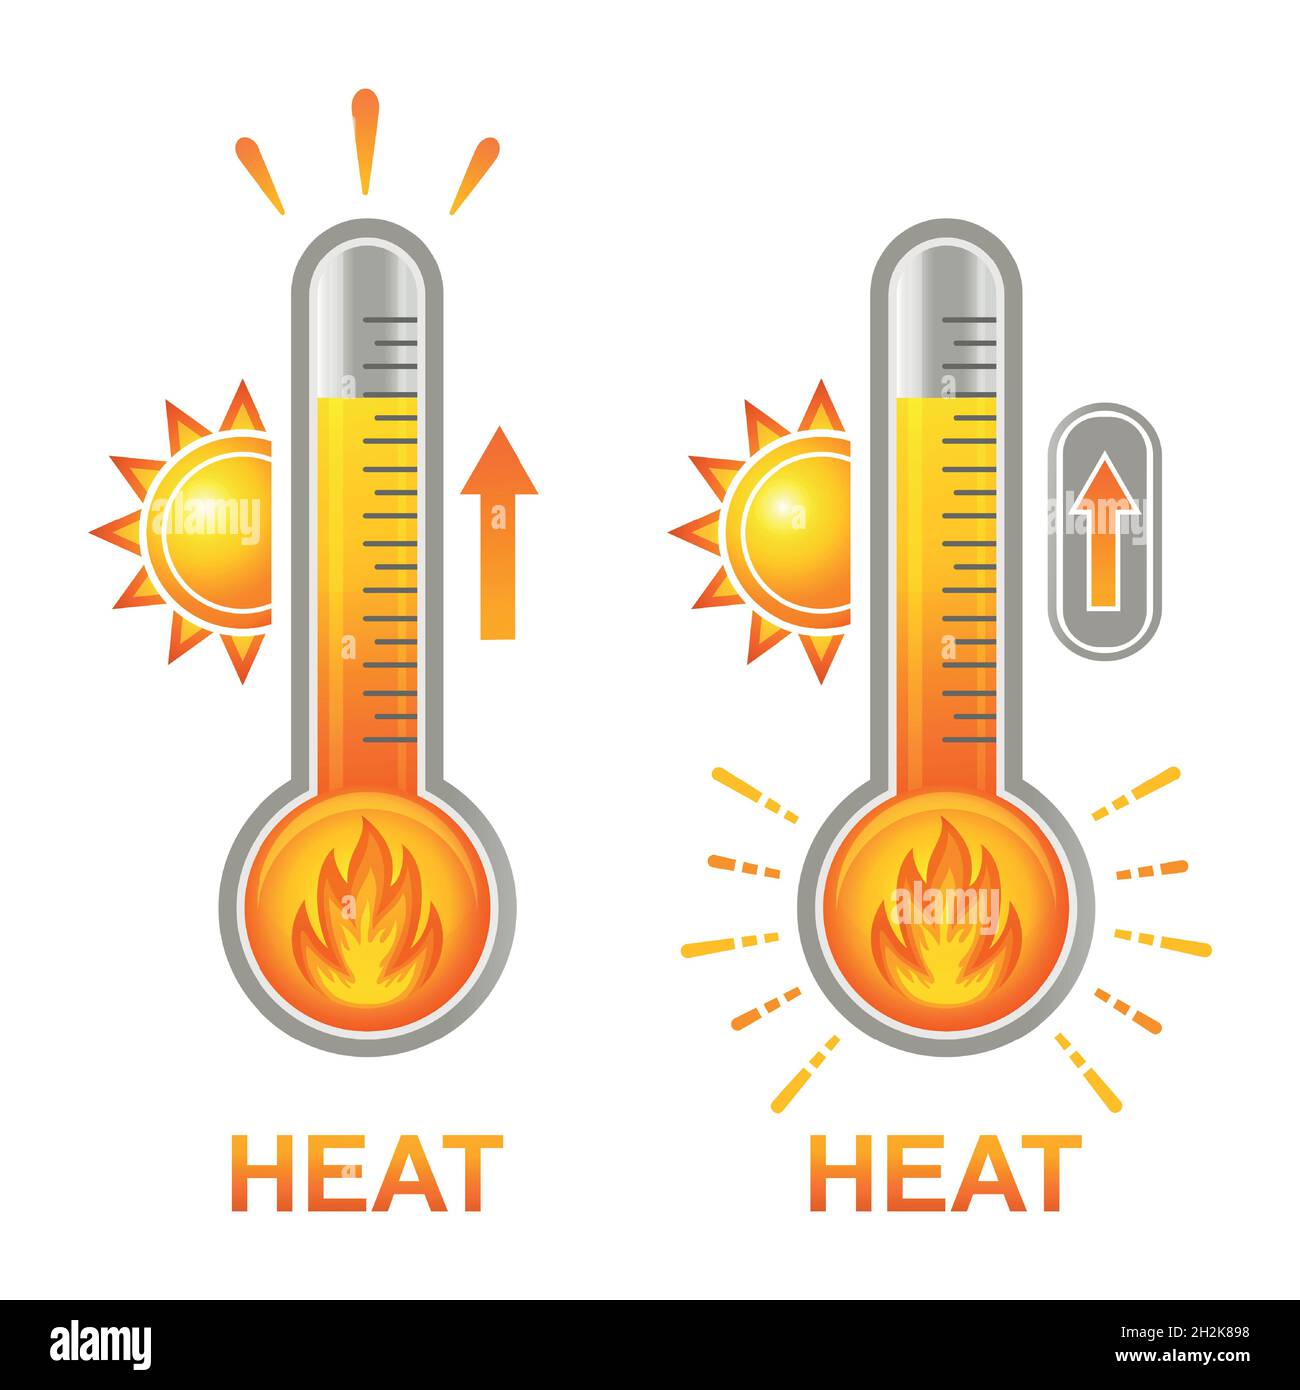 https://c8.alamy.com/comp/2H2K898/hot-thermometer-with-fire-flame-high-heat-temperature-extreme-overheating-icon-glass-mercury-bulb-with-sun-warm-summer-weather-temp-gauge-vector-2H2K898.jpg